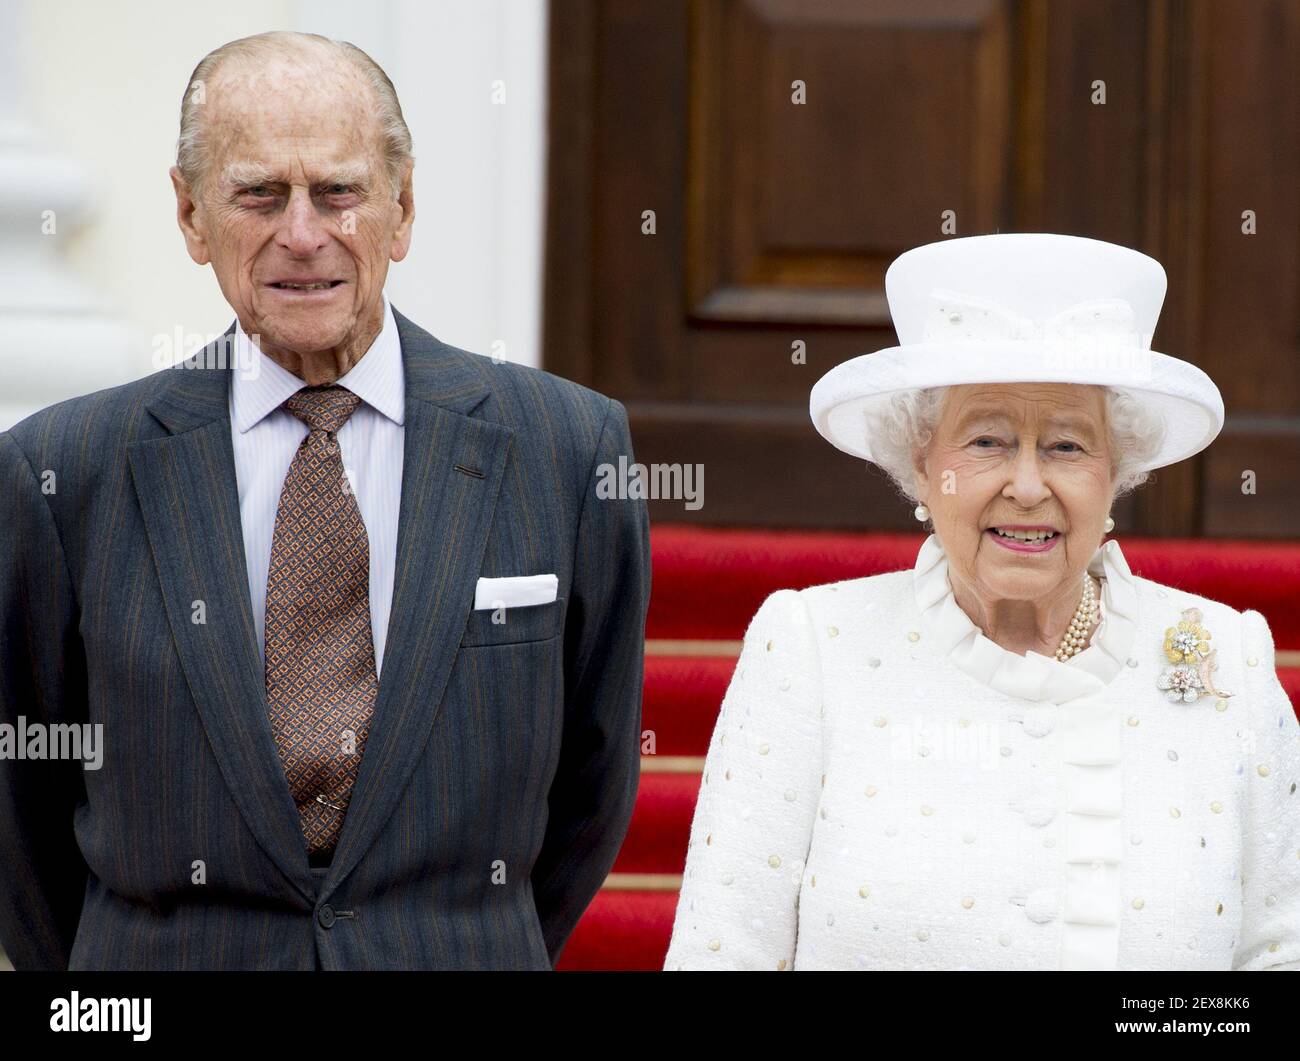 24-6-2015 BERLIN - Britain's Queen Elizabeth II with her husband Prince Philip, The Duke of Edinburgh as she arrives at Bellevue Palace in Berlin on June 24, 2015. (Photo by Robin Utrecht) *** Please Use Credit from Credit Field *** Stock Photo